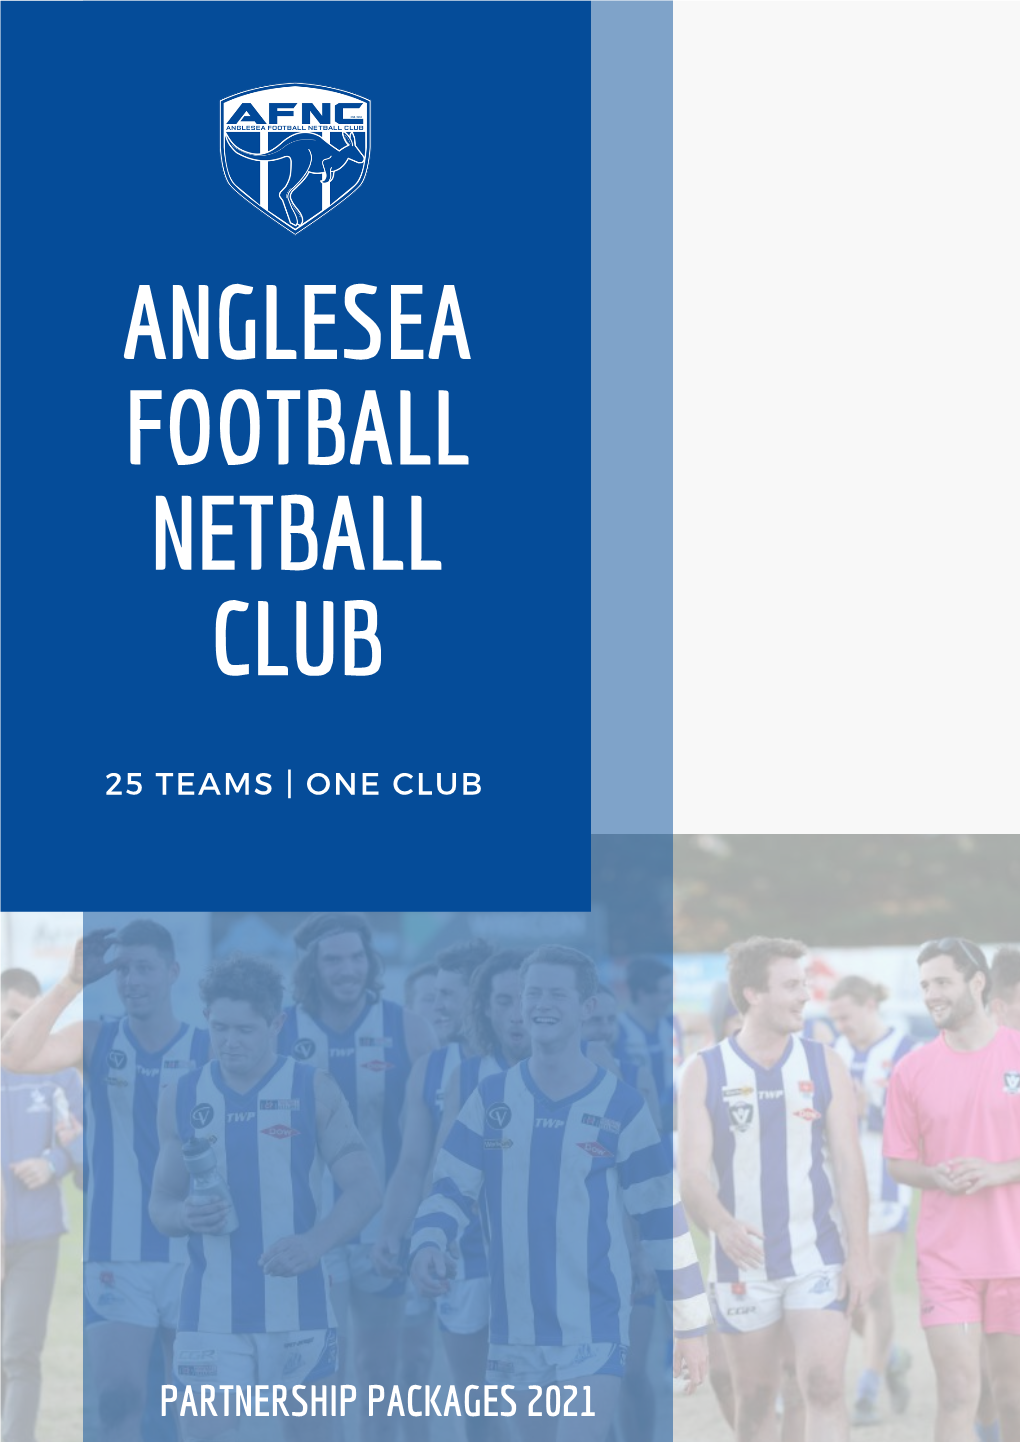 Angleseafnc 2021 Partnership Packages